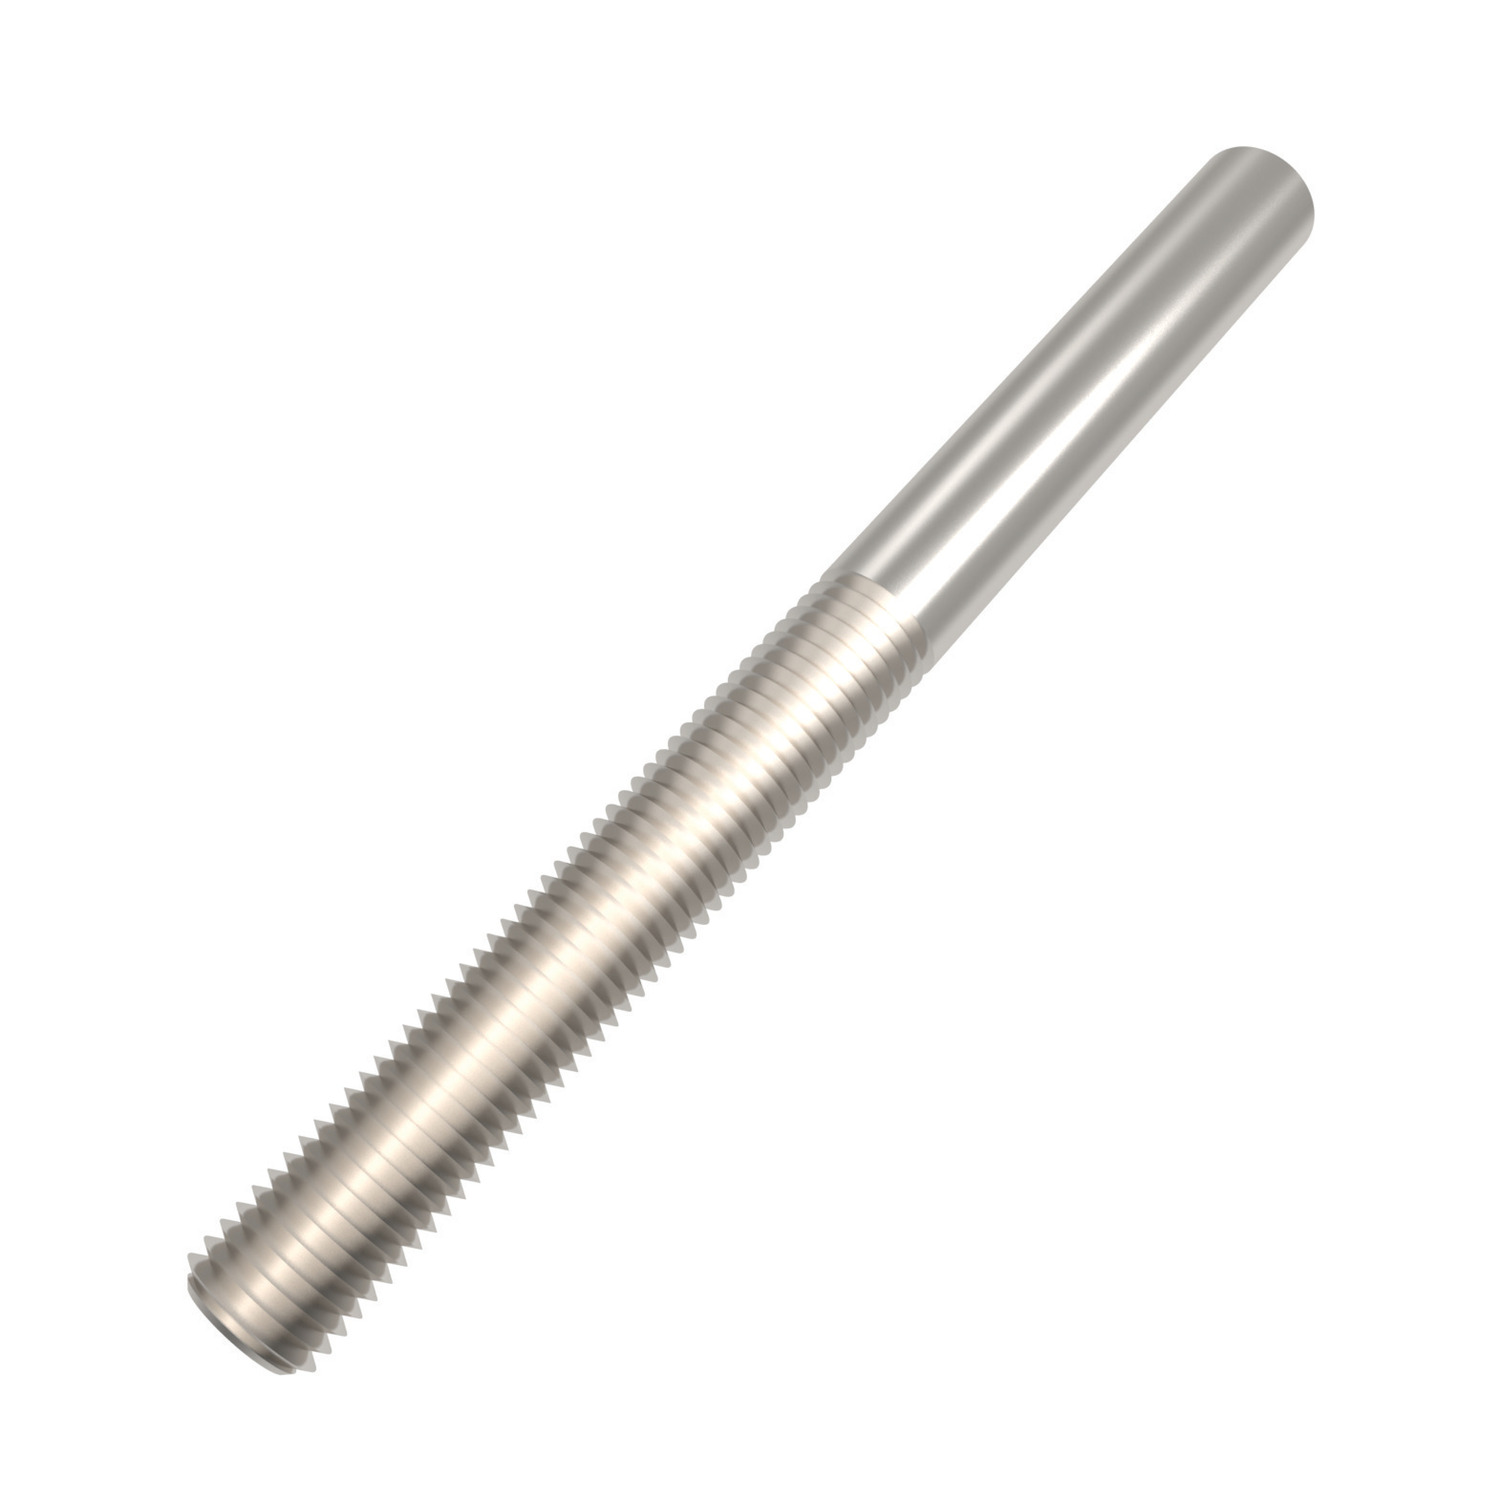 R3868.R020-A4 Welding Studs RH M20 A4 s/s Not to be used for lifting unless SWL marked.